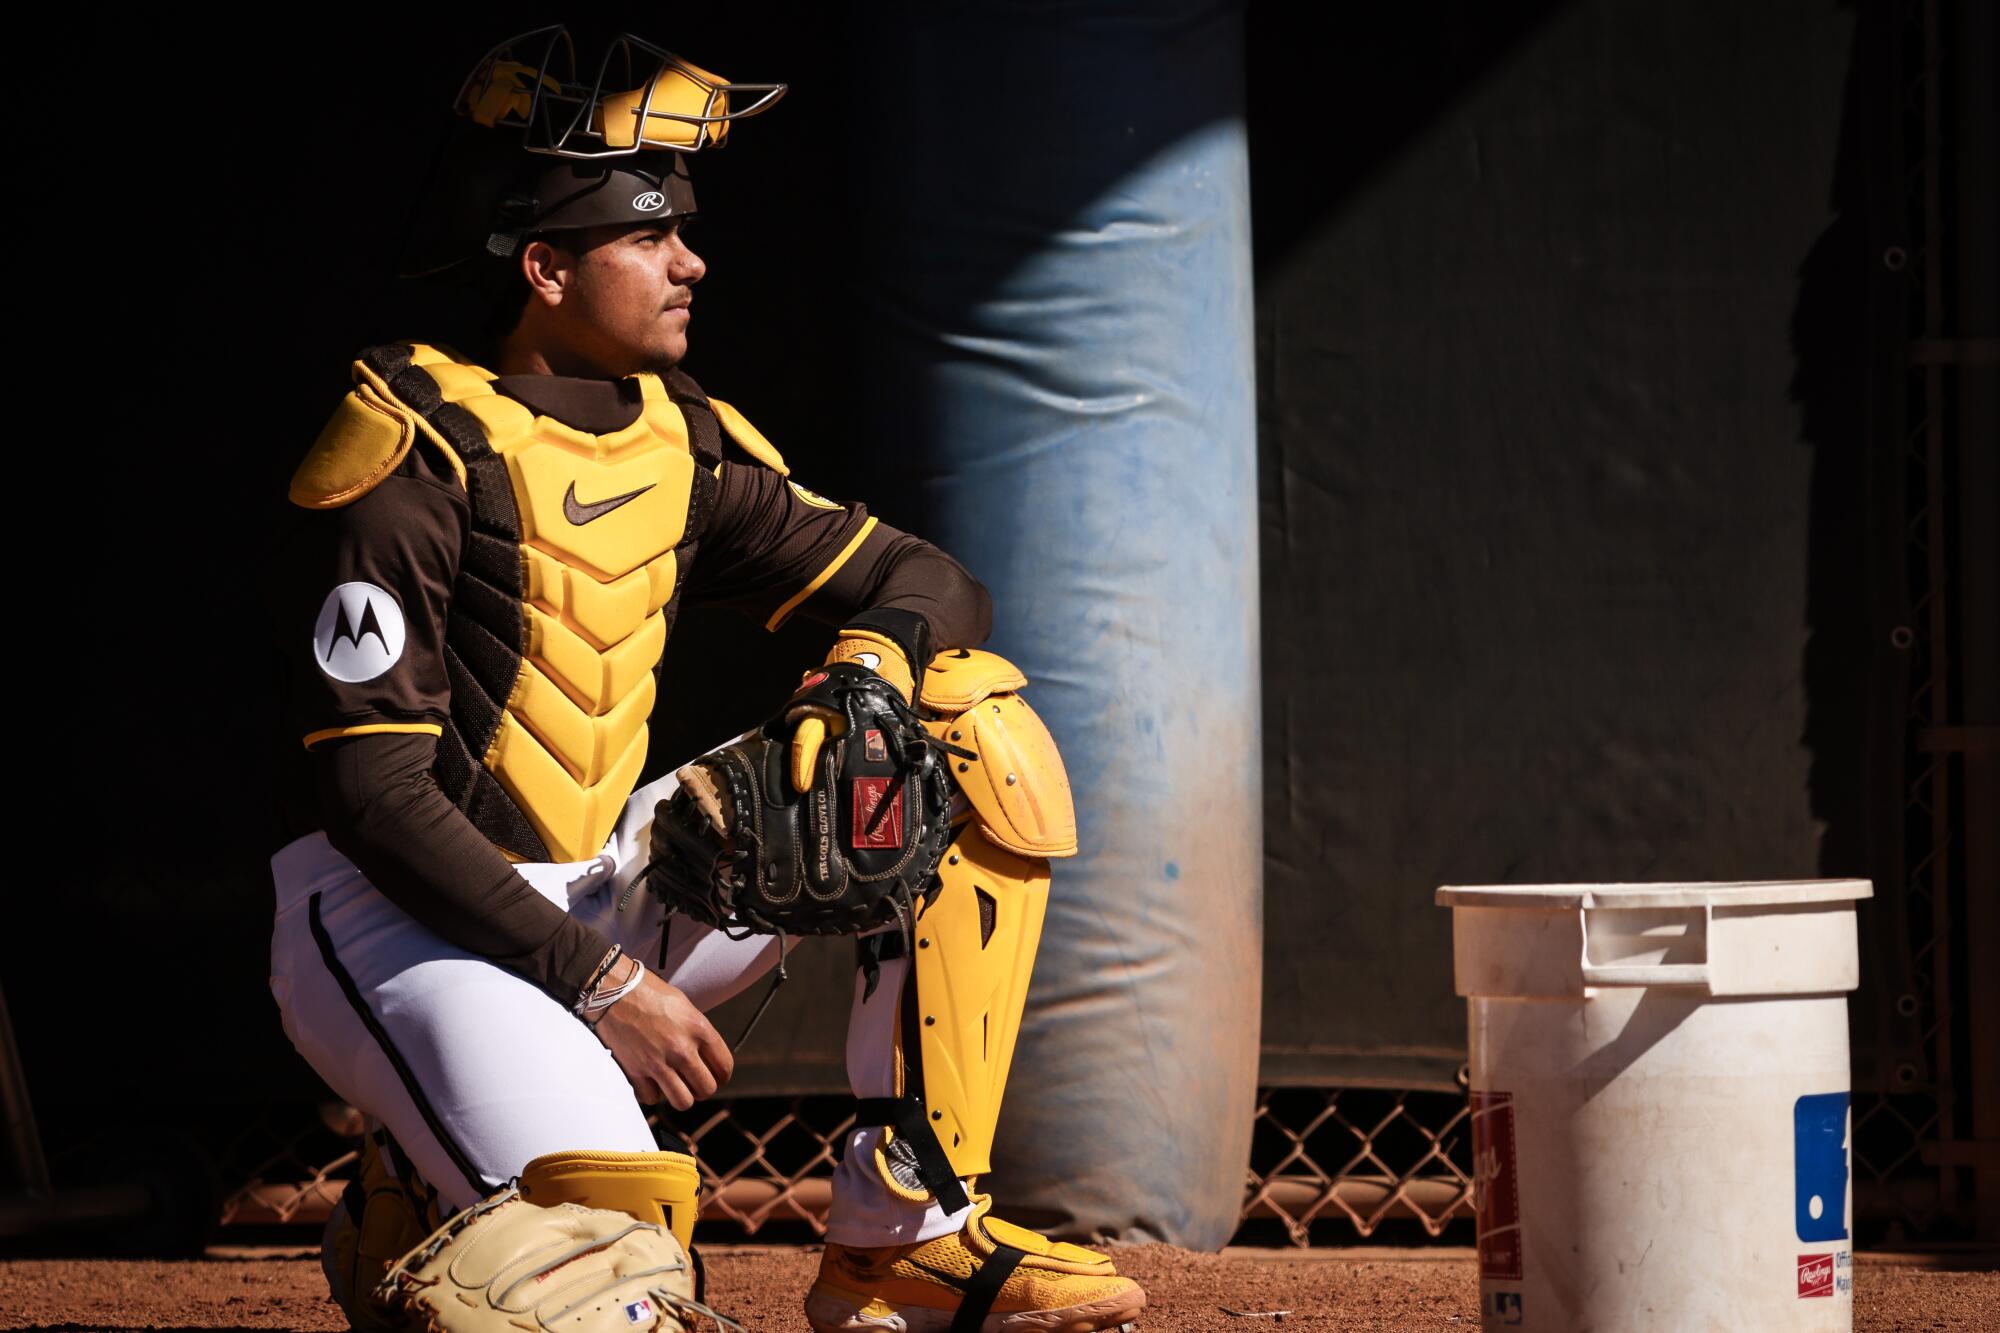 Teenage catcher Ethan Salas continues to impress Padres, knows his goal  this spring - The San Diego Union-Tribune